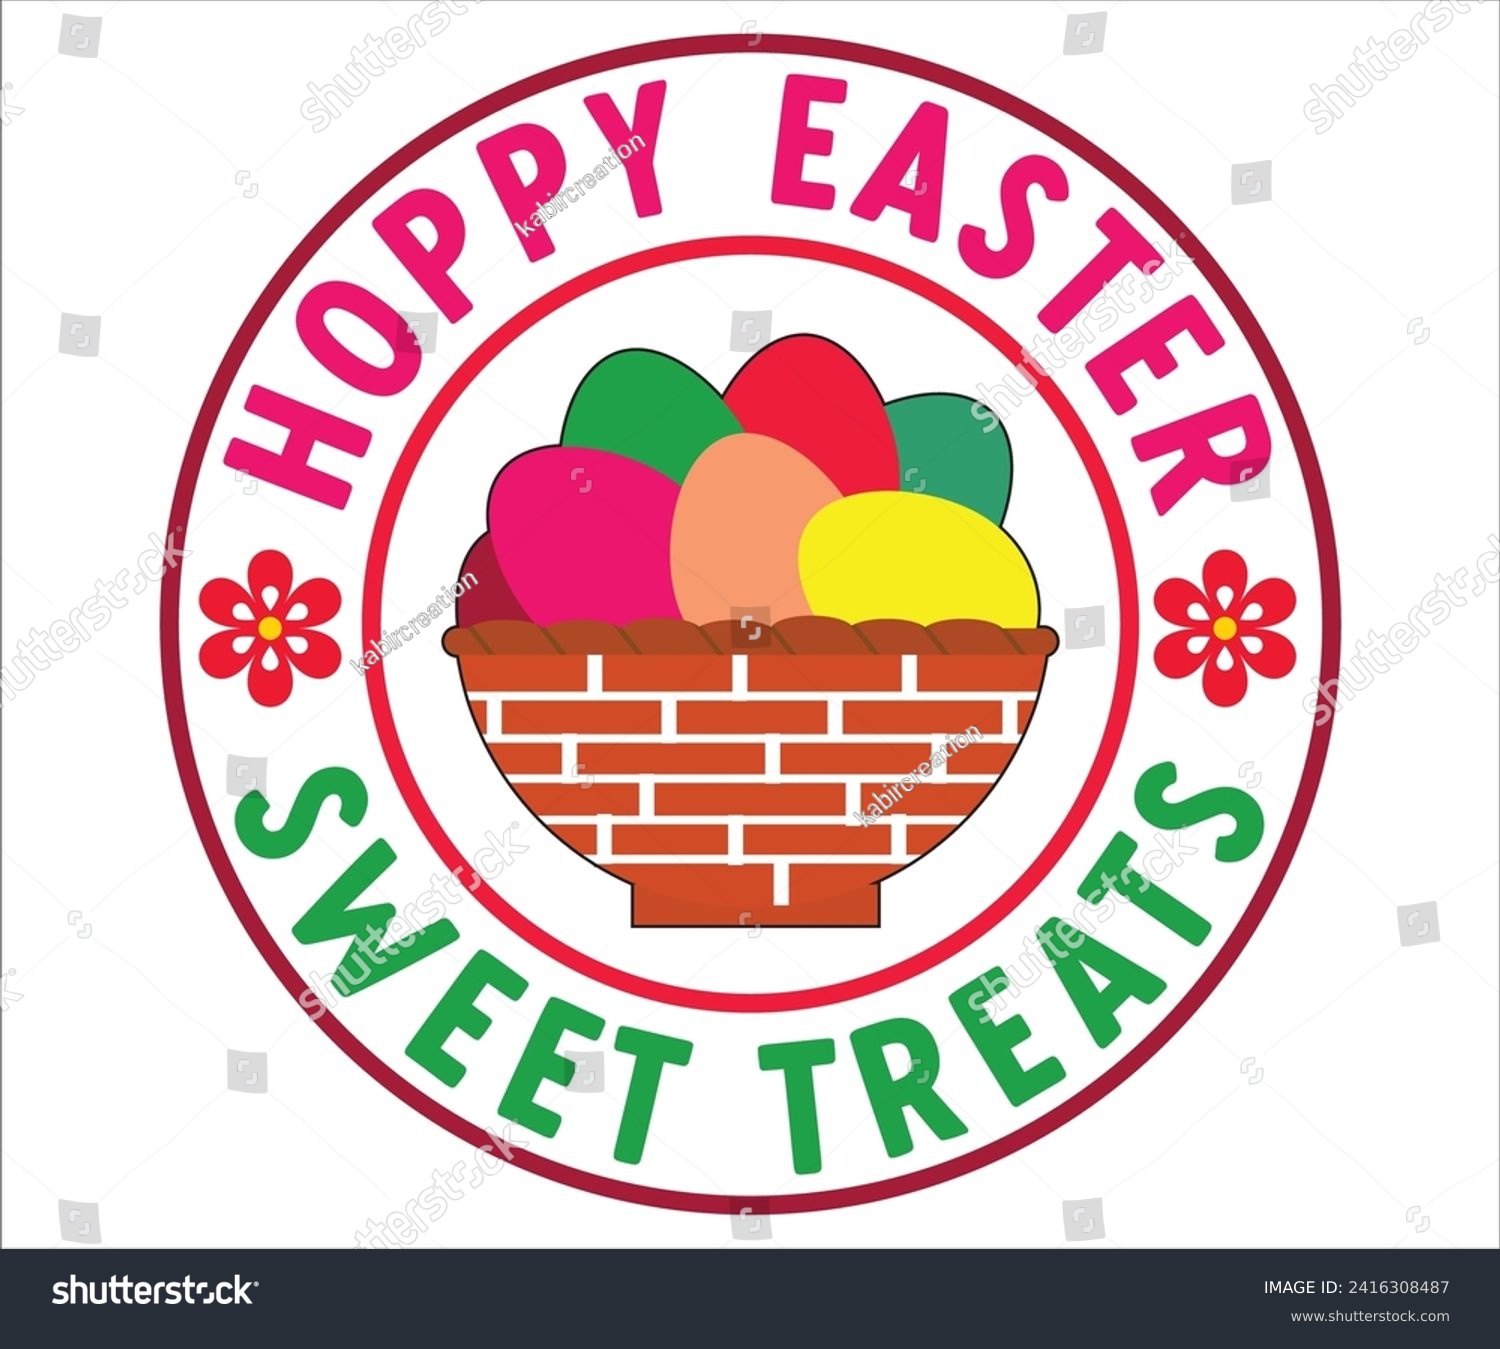 SVG of Hoppy Sweet Treats T-shirt, Happy Easter T-shirt, Easter Saying,Spring SVG,Bunny and spring T-shirt, Easter Quotes svg,Easter shirt, Easter Funny Quotes, Cut File for Cricut svg